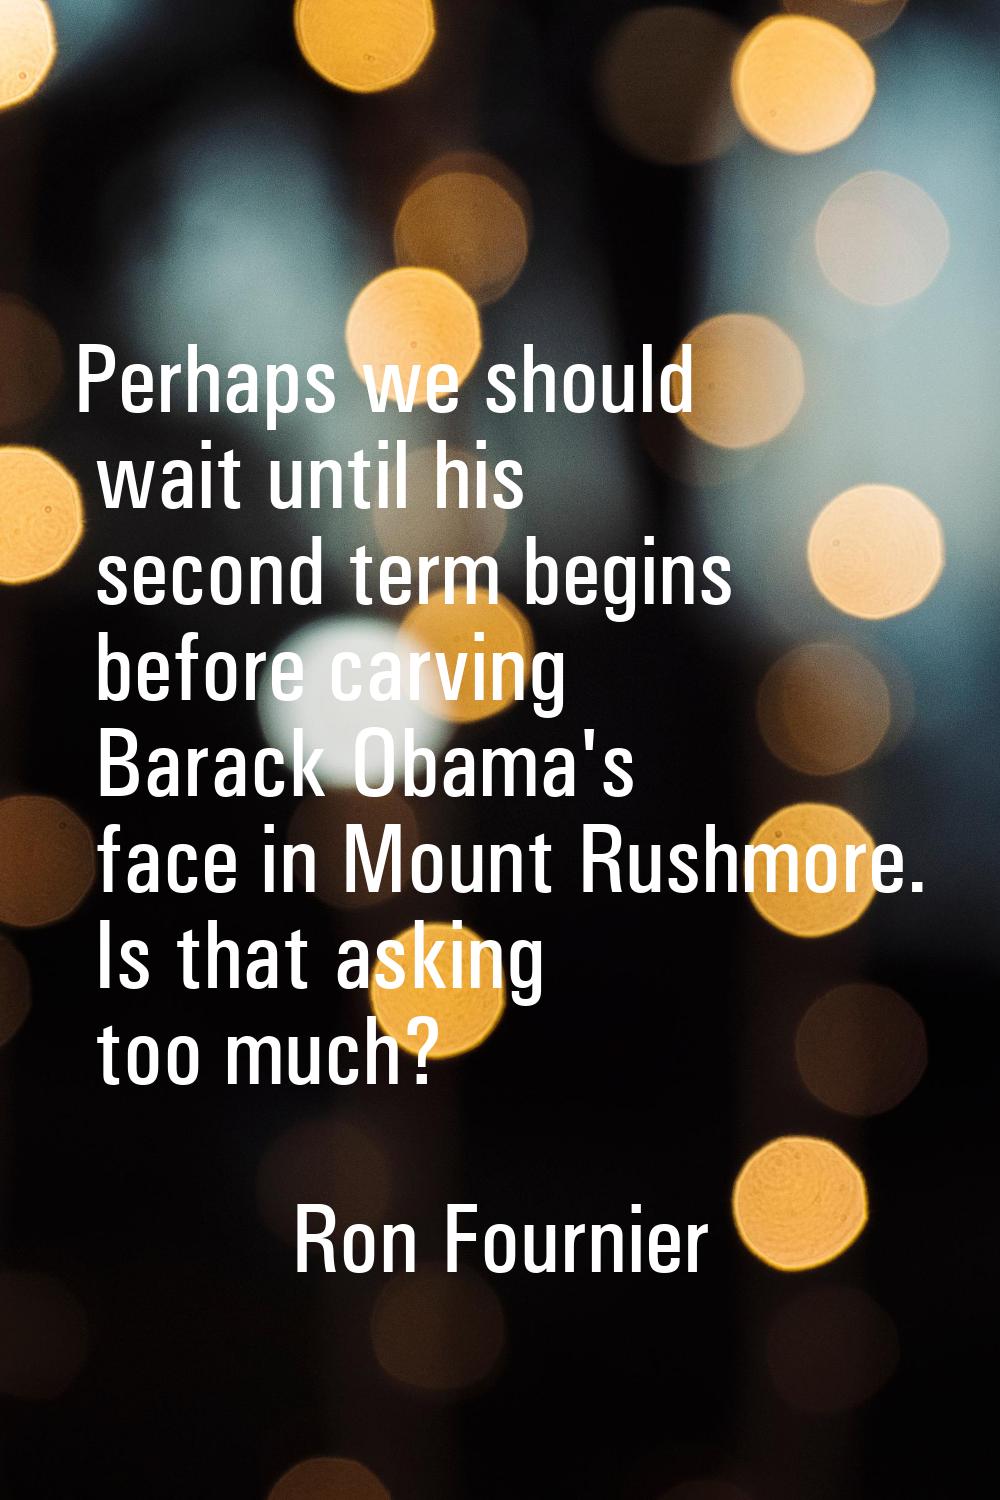 Perhaps we should wait until his second term begins before carving Barack Obama's face in Mount Rus